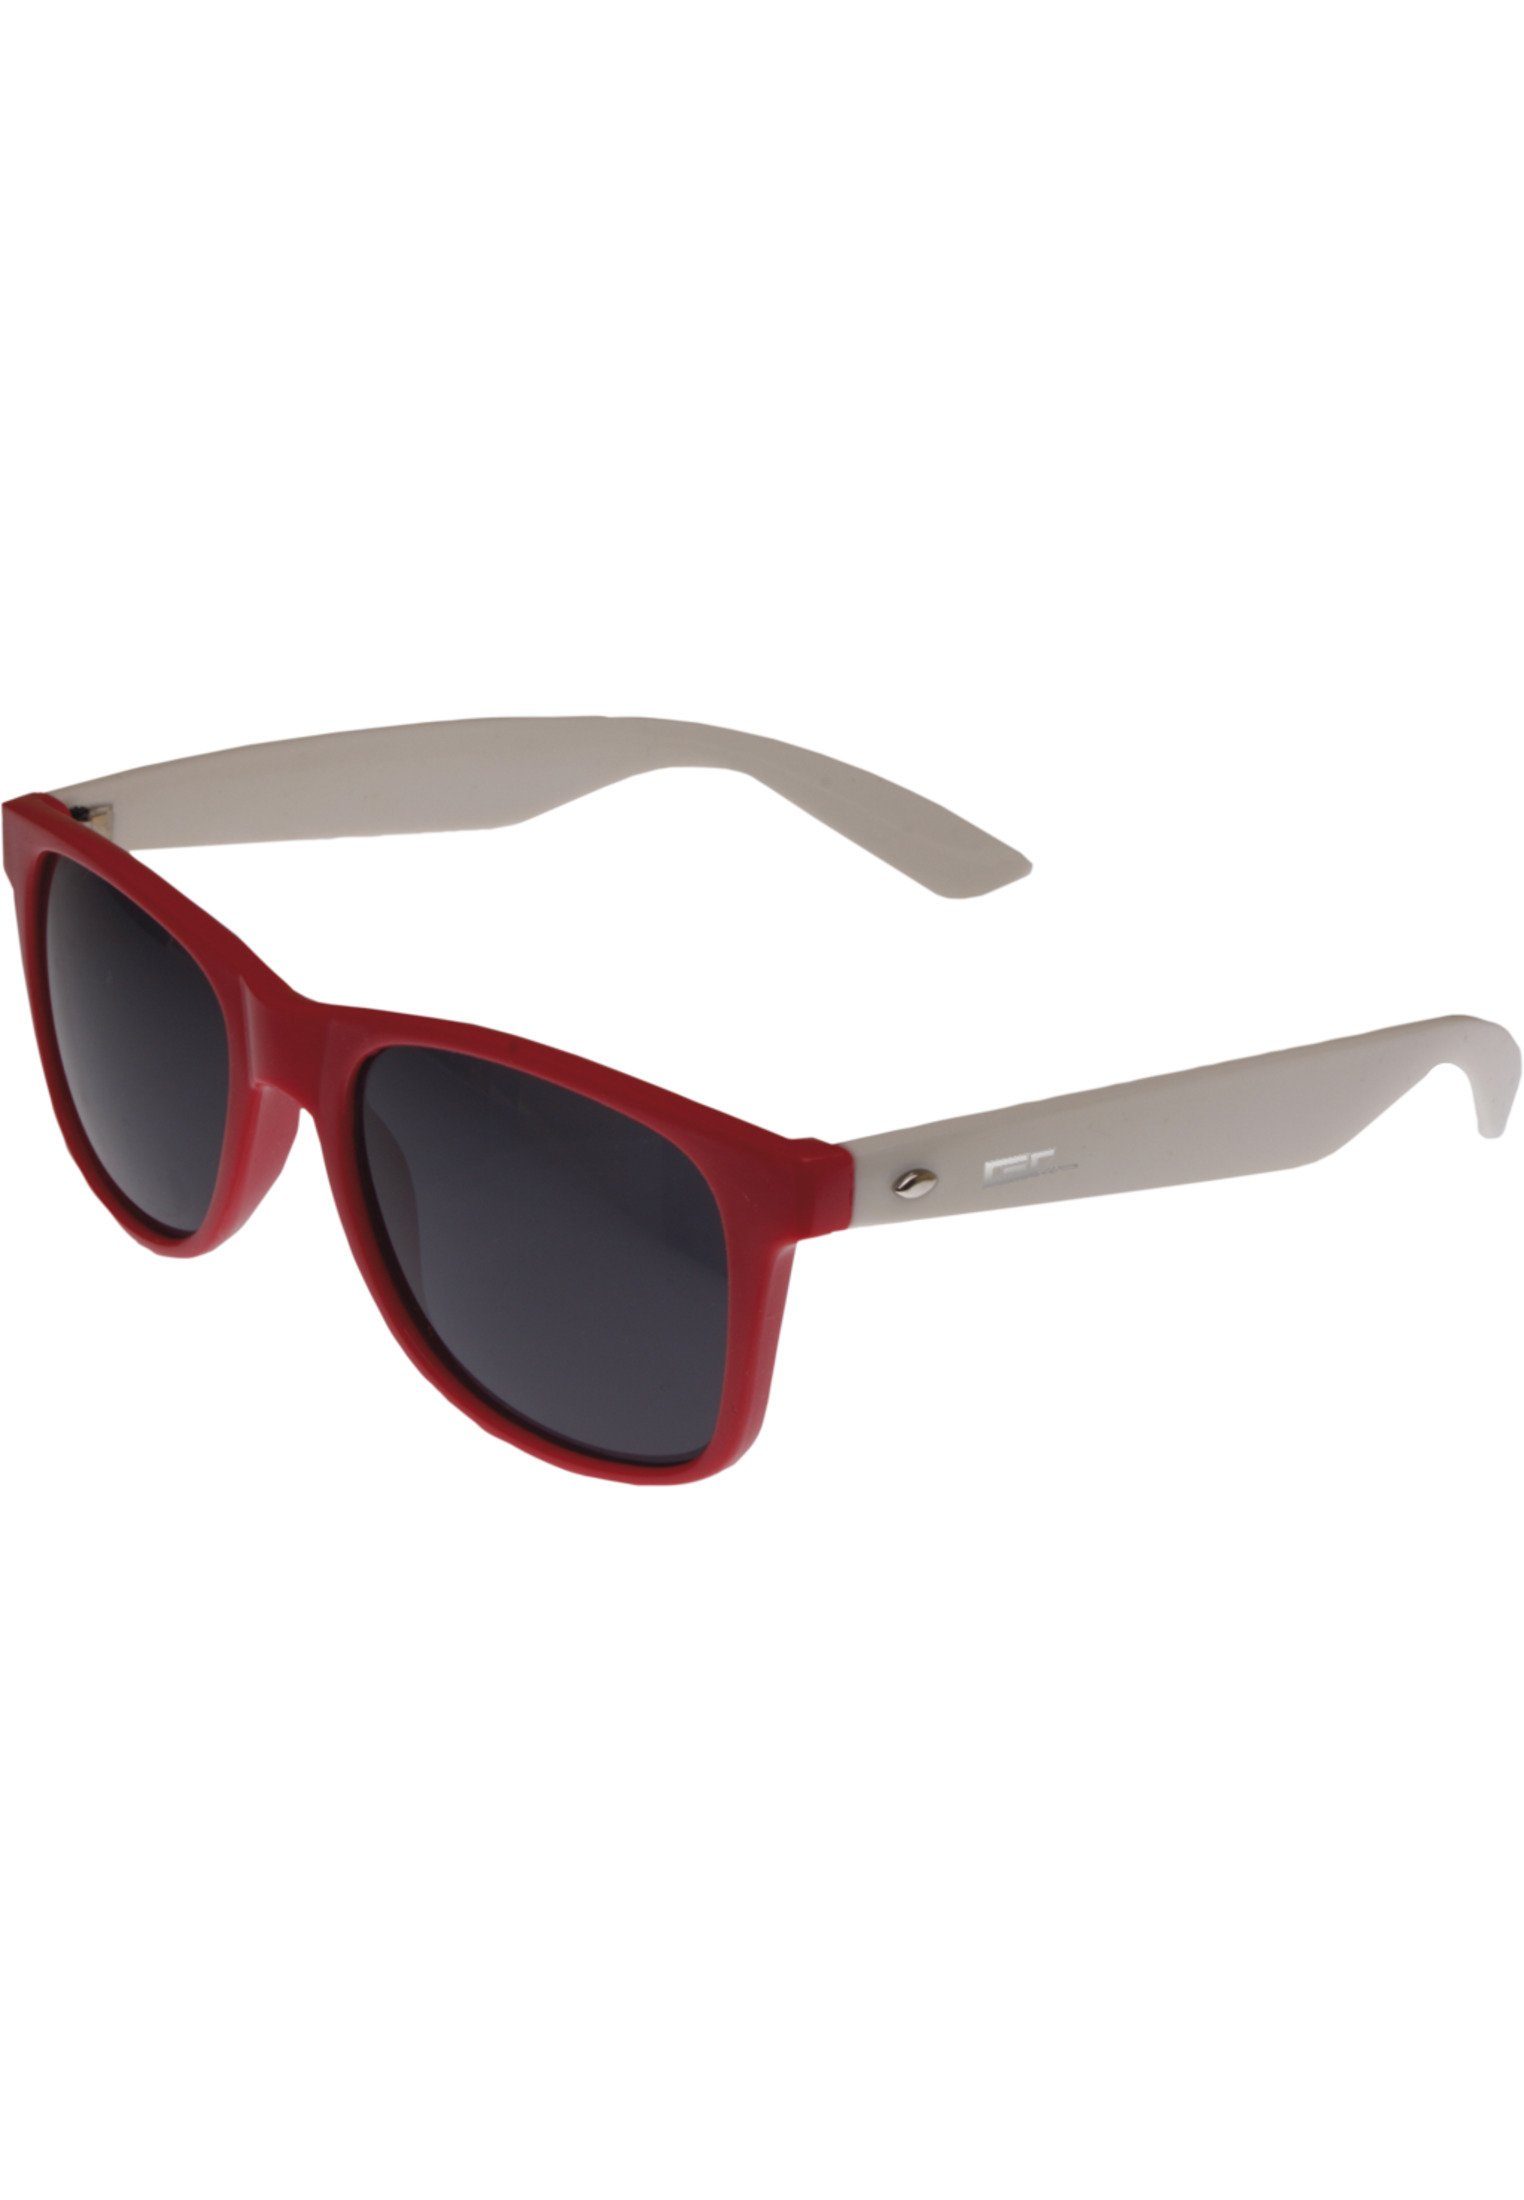 MSTRDS Shades red/white Sonnenbrille Accessoires Groove GStwo